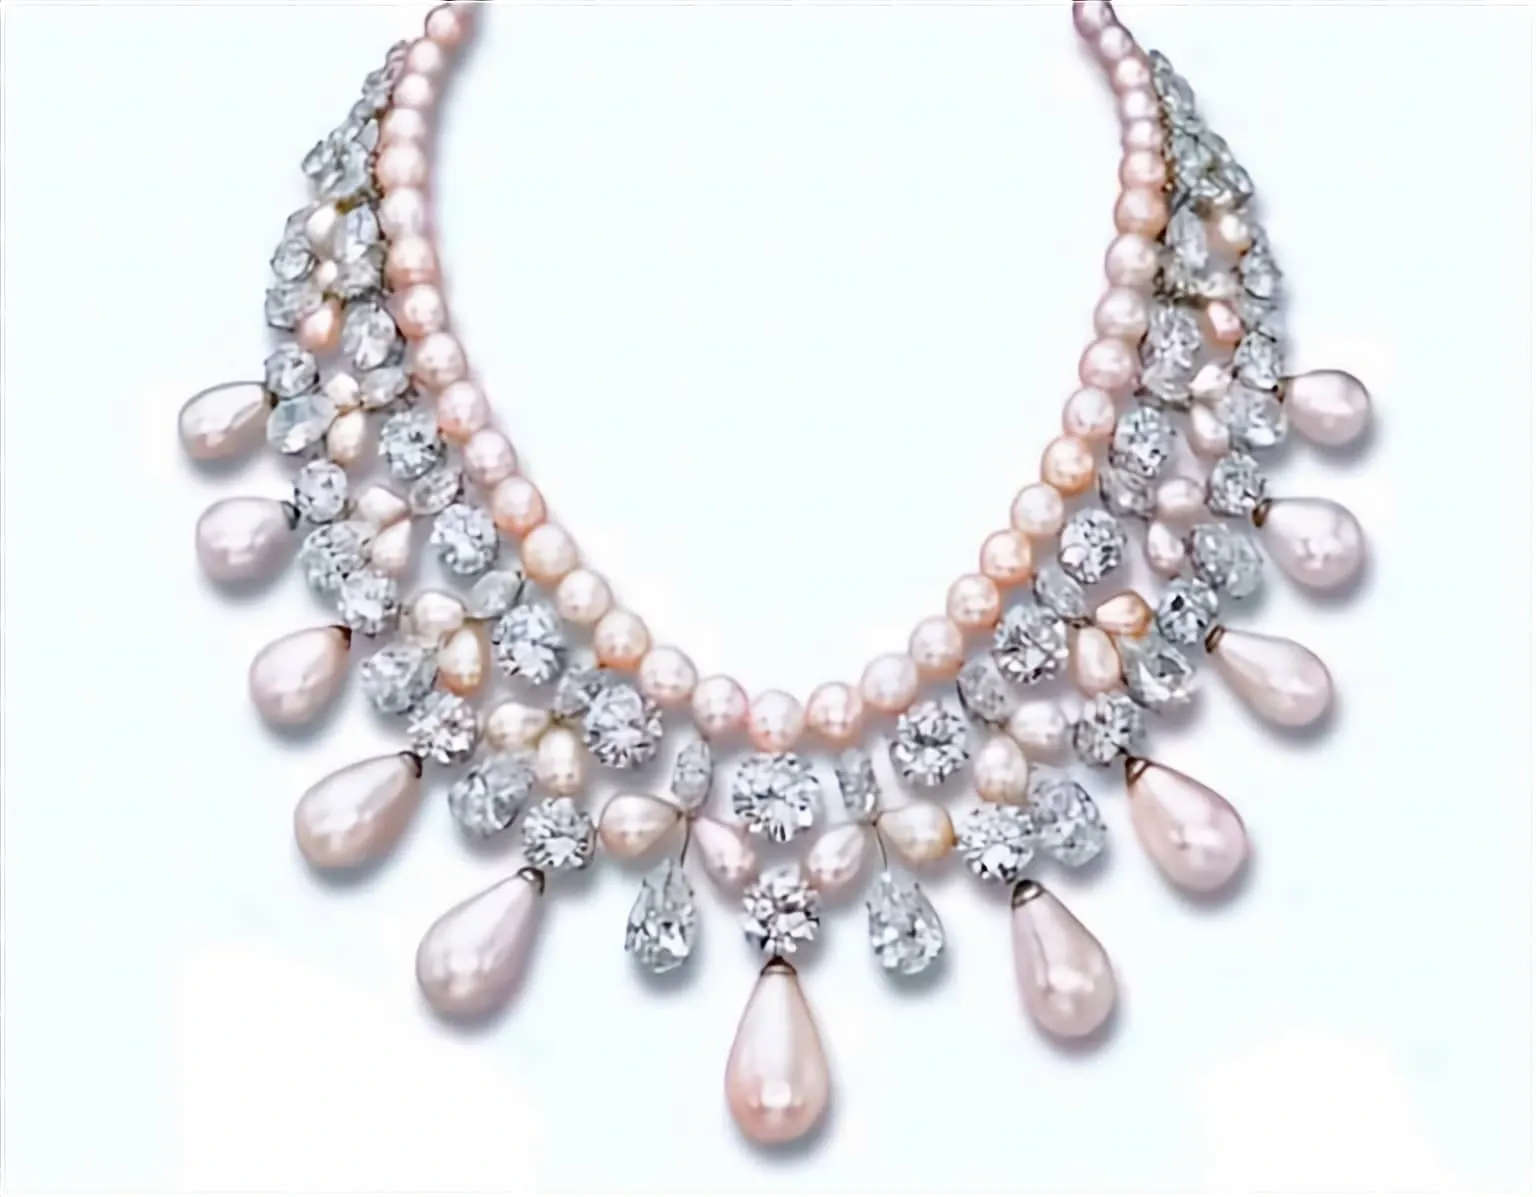 Grand Diamond and Pearl Necklace